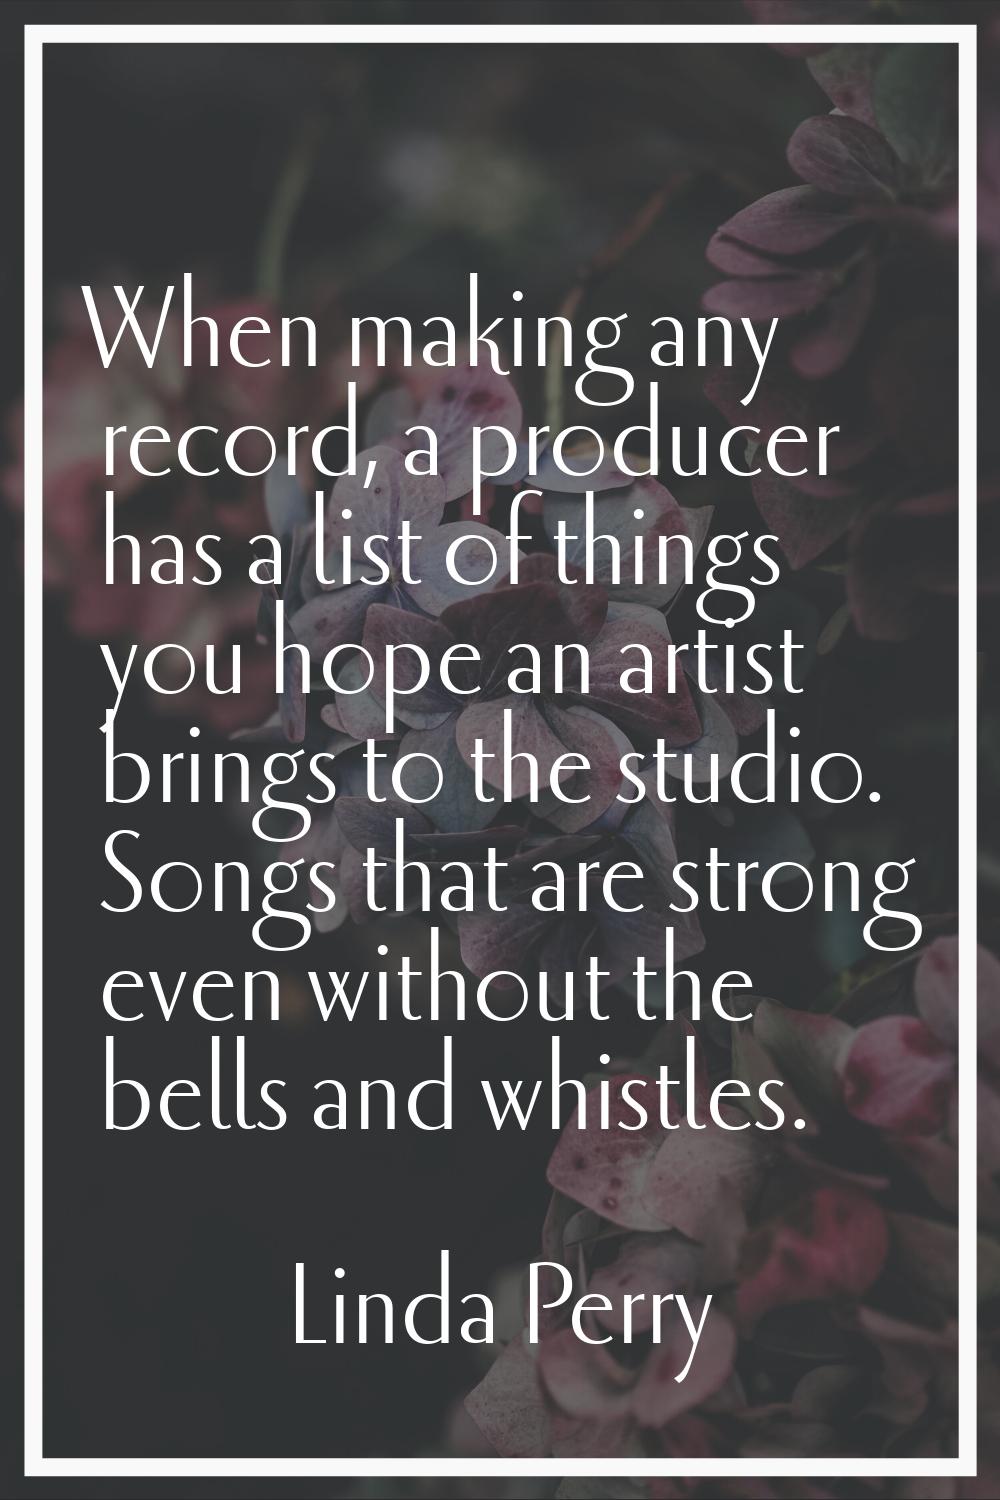 When making any record, a producer has a list of things you hope an artist brings to the studio. So